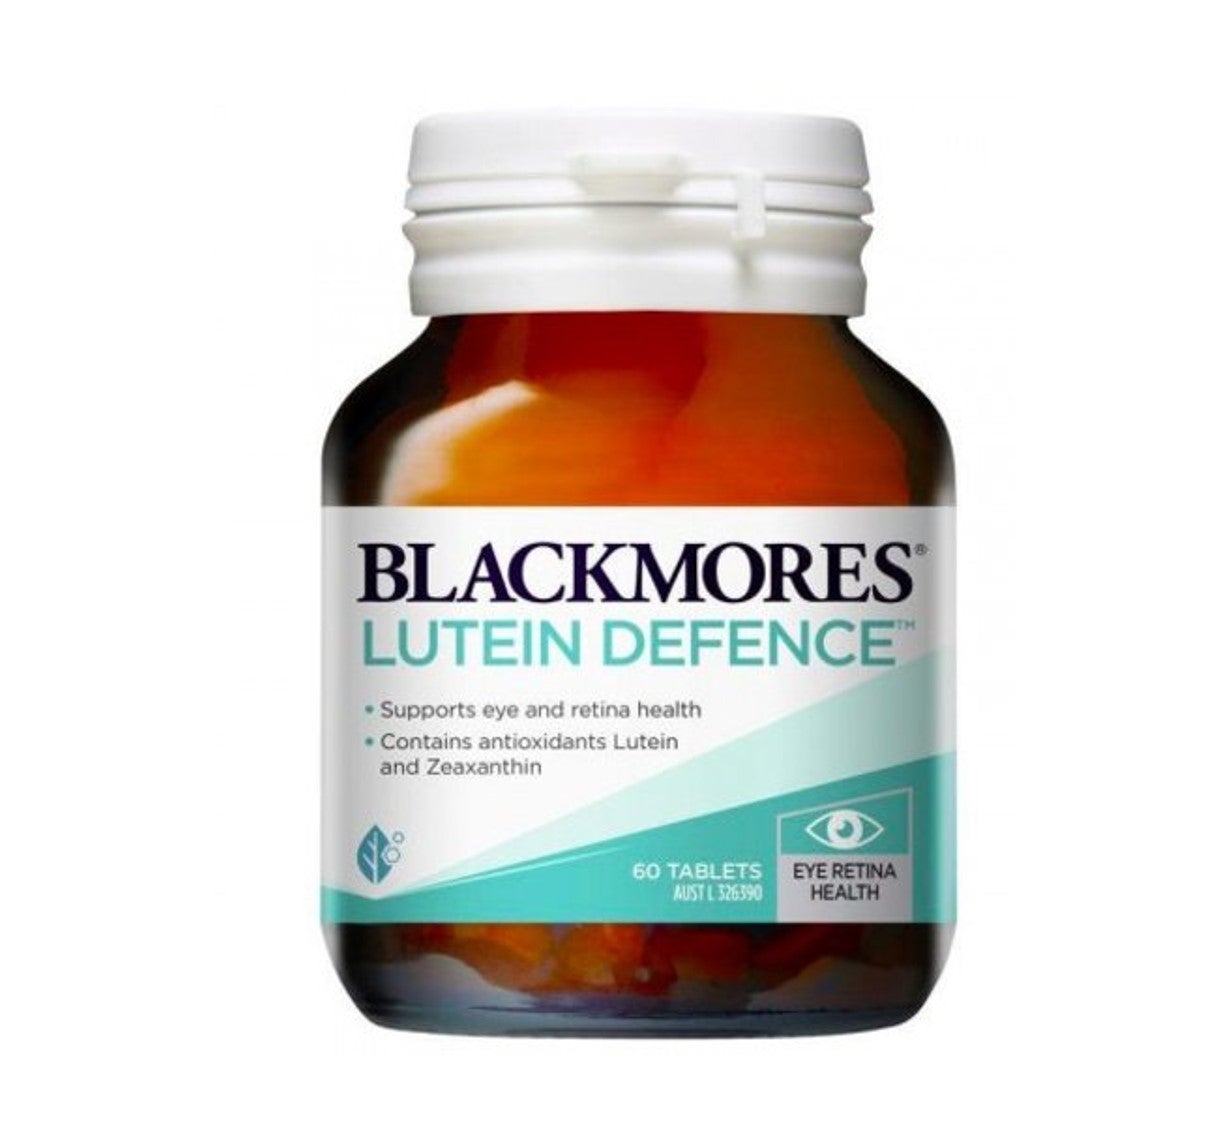 blackmores-lutein-defence-60tablets